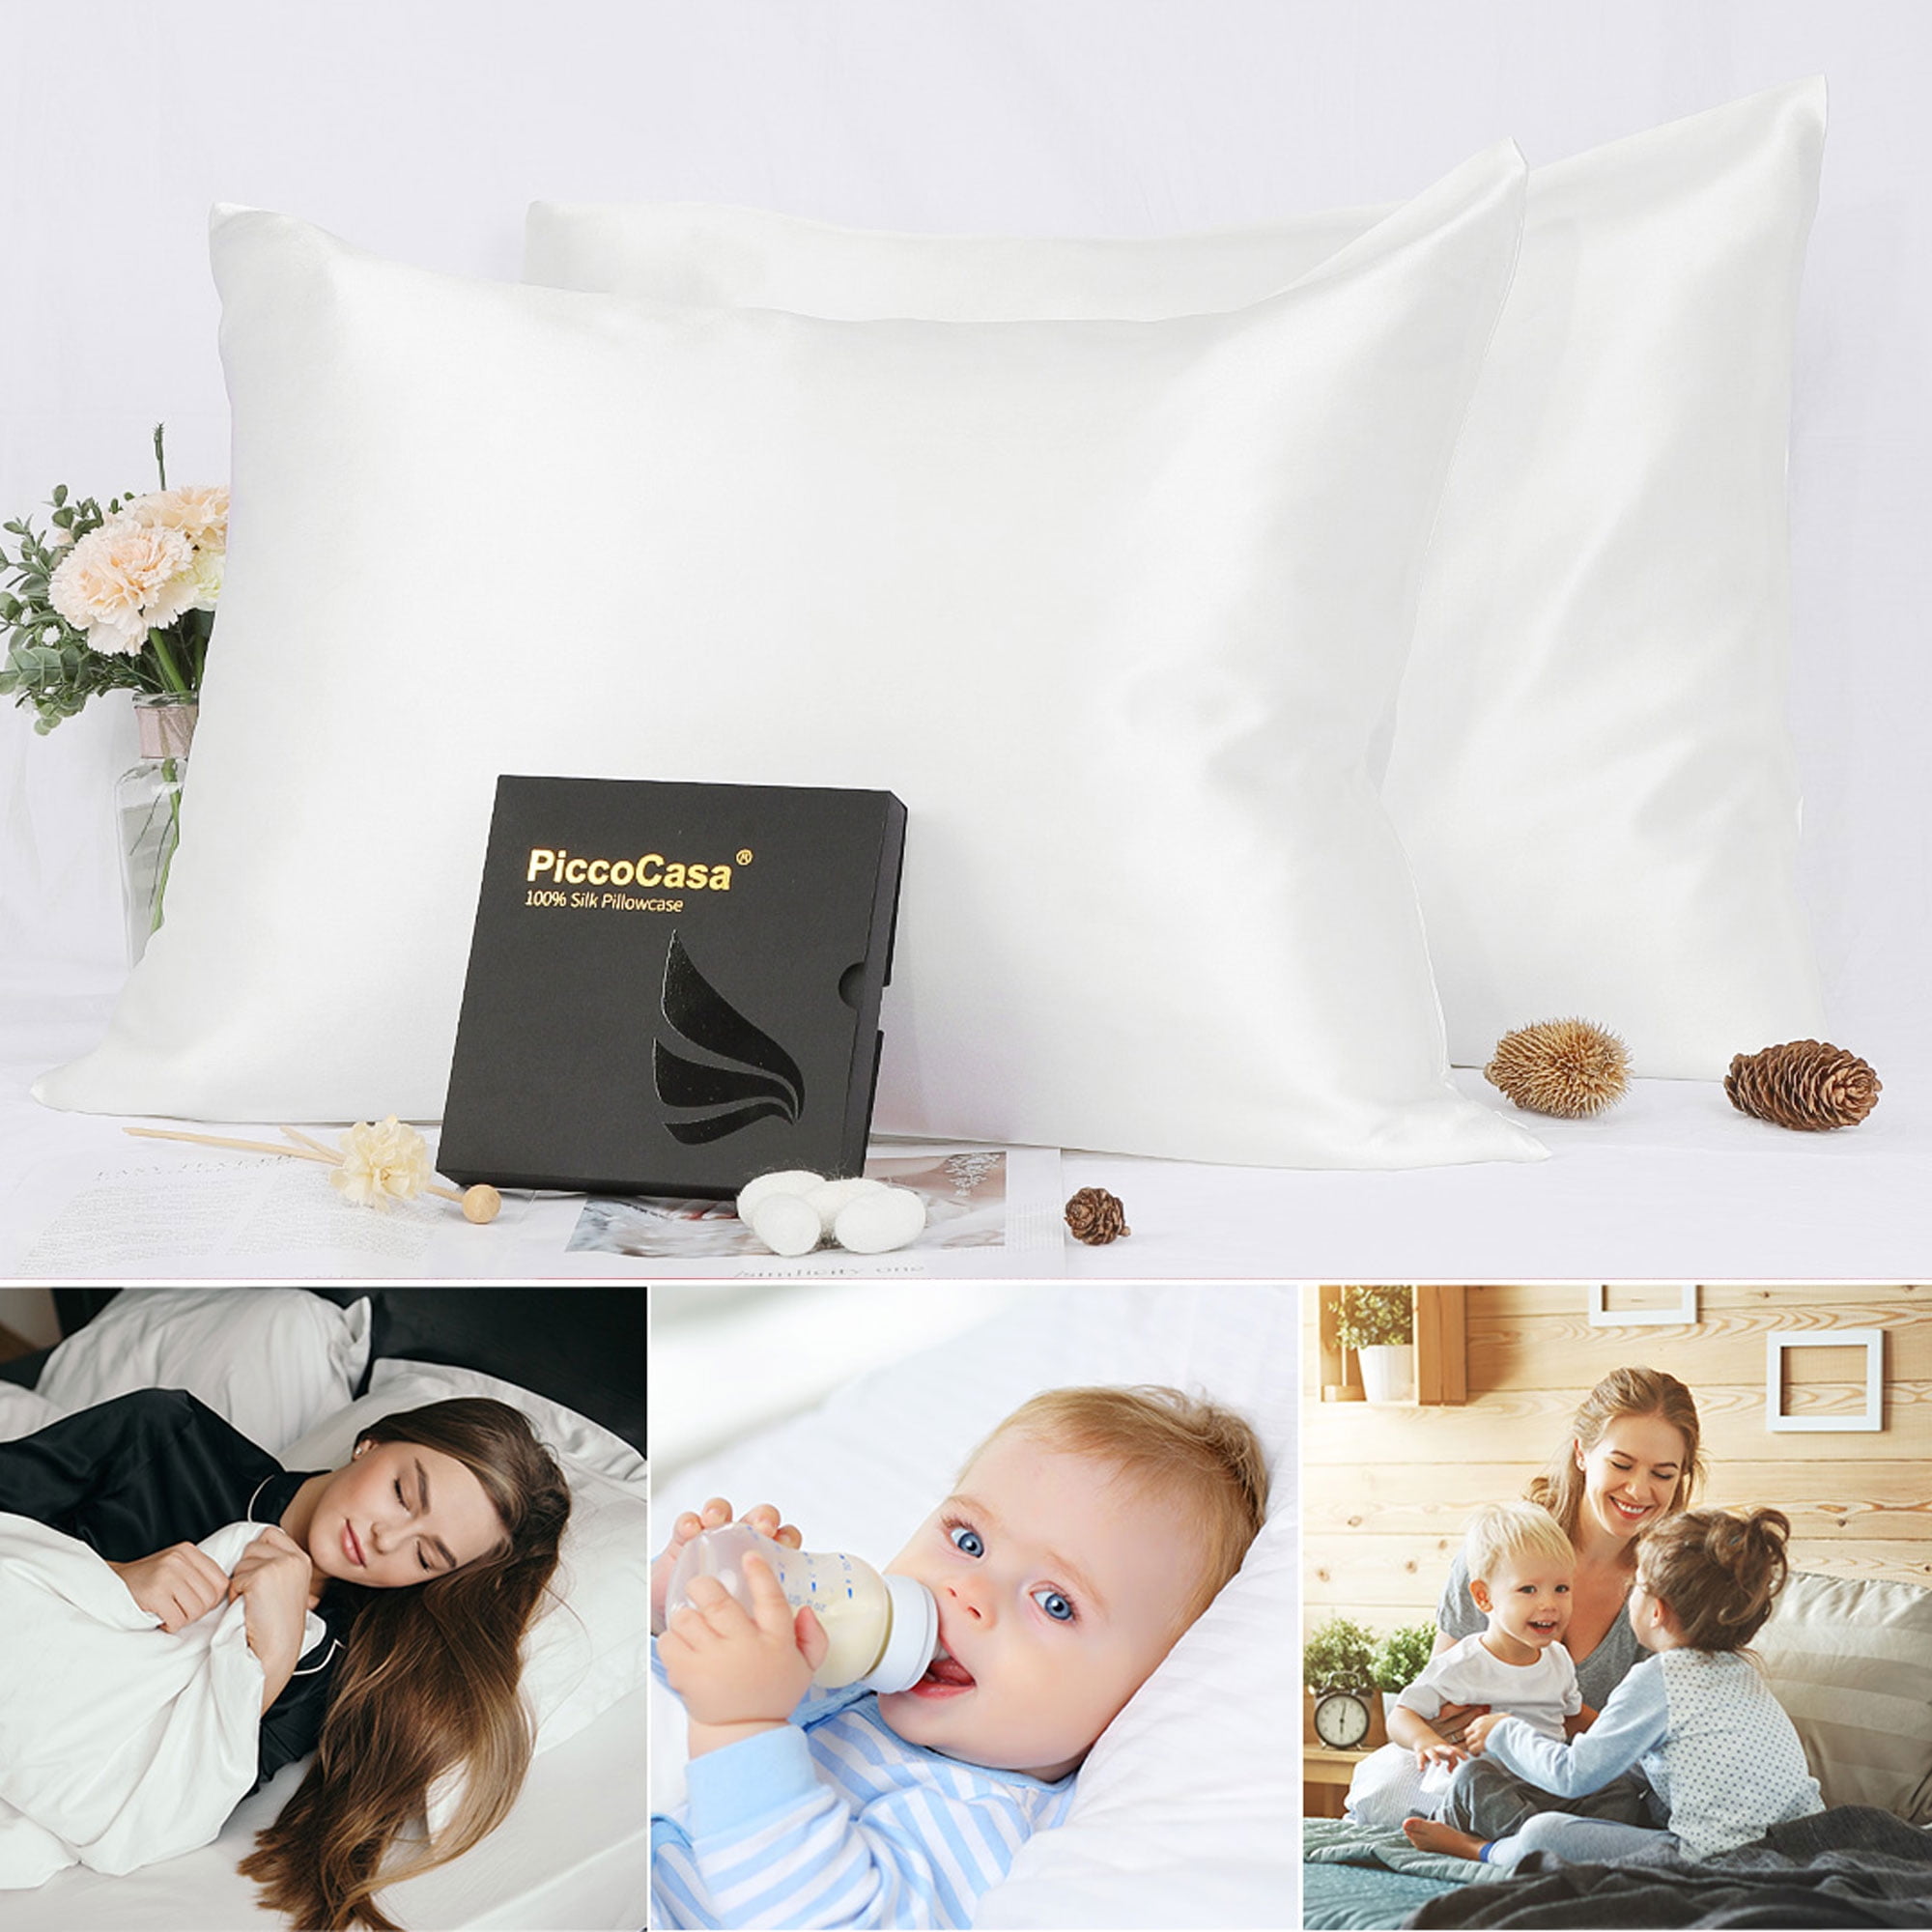 Details about   100% Natural Silk Pillowcase Hair Beauty Printed Pillow Towel for Healthy Sleep